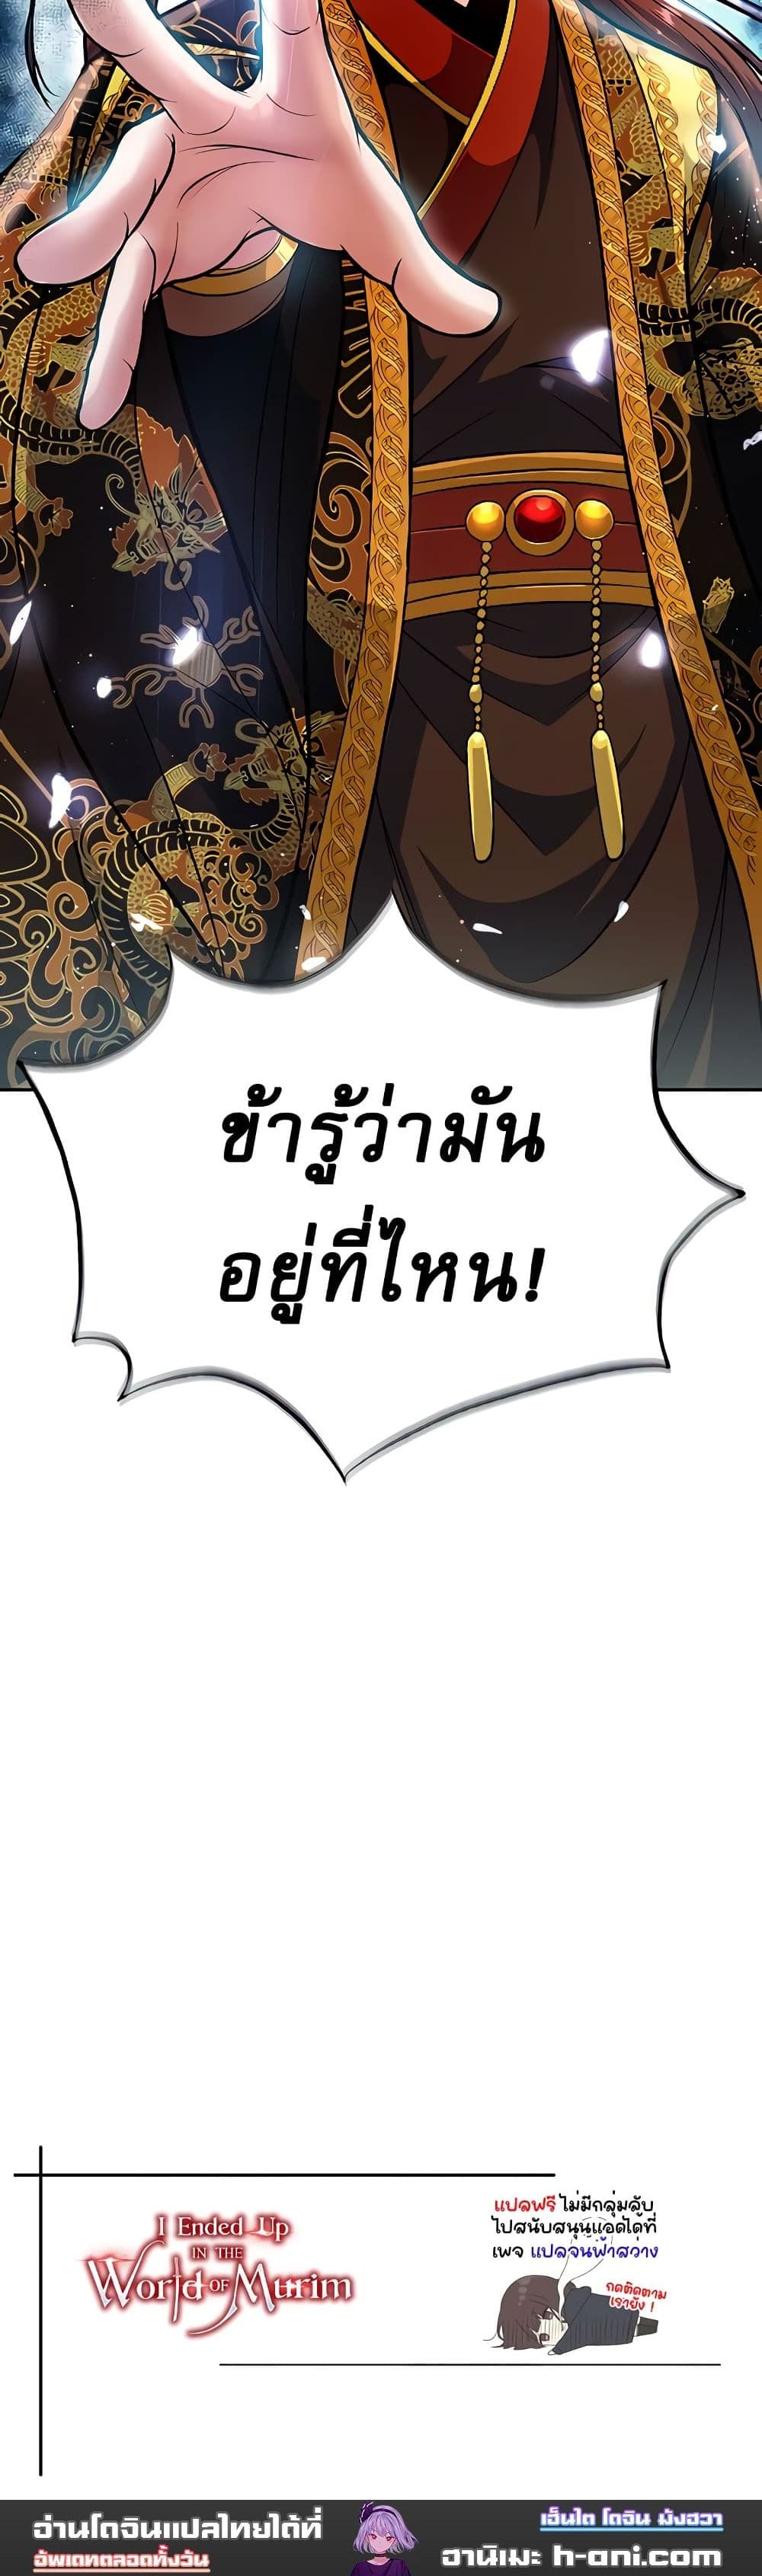 I Ended Up in the World of Murim ตอนที่ 5 ภาพ 22